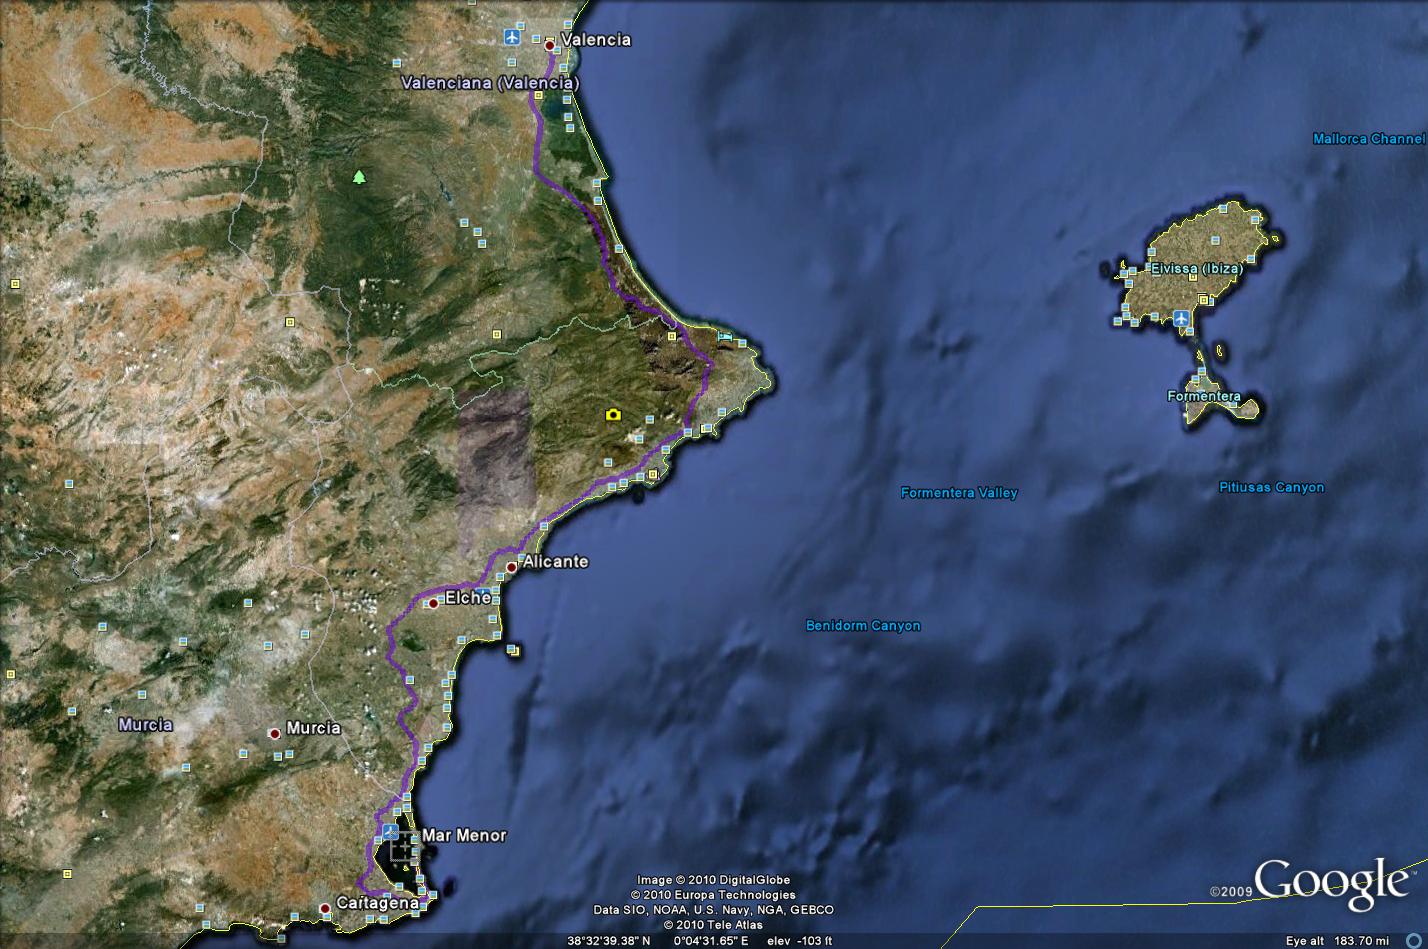 Route from Valencia to Mar Menor (To see full image of route click on picture and again when the new  window opens)